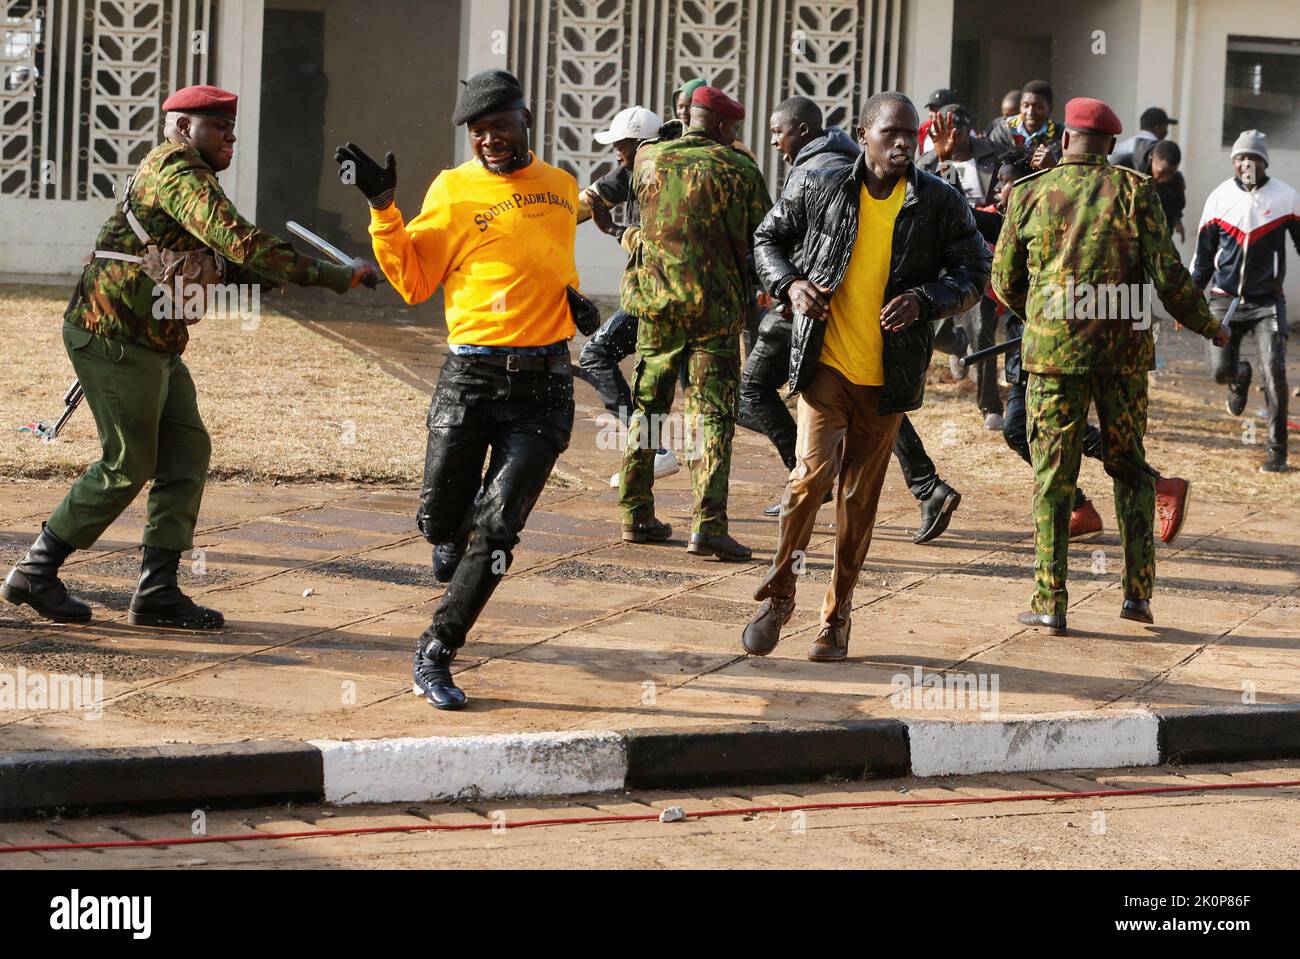 Riot police attempt to control people as they jostle to attend the inauguration of Kenya's President William Ruto before his swearing-in ceremony at the Moi International Stadium Kasarani, in Nairobi, Kenya September 13, 2022. REUTERS/Thomas Mukoya Stock Photo